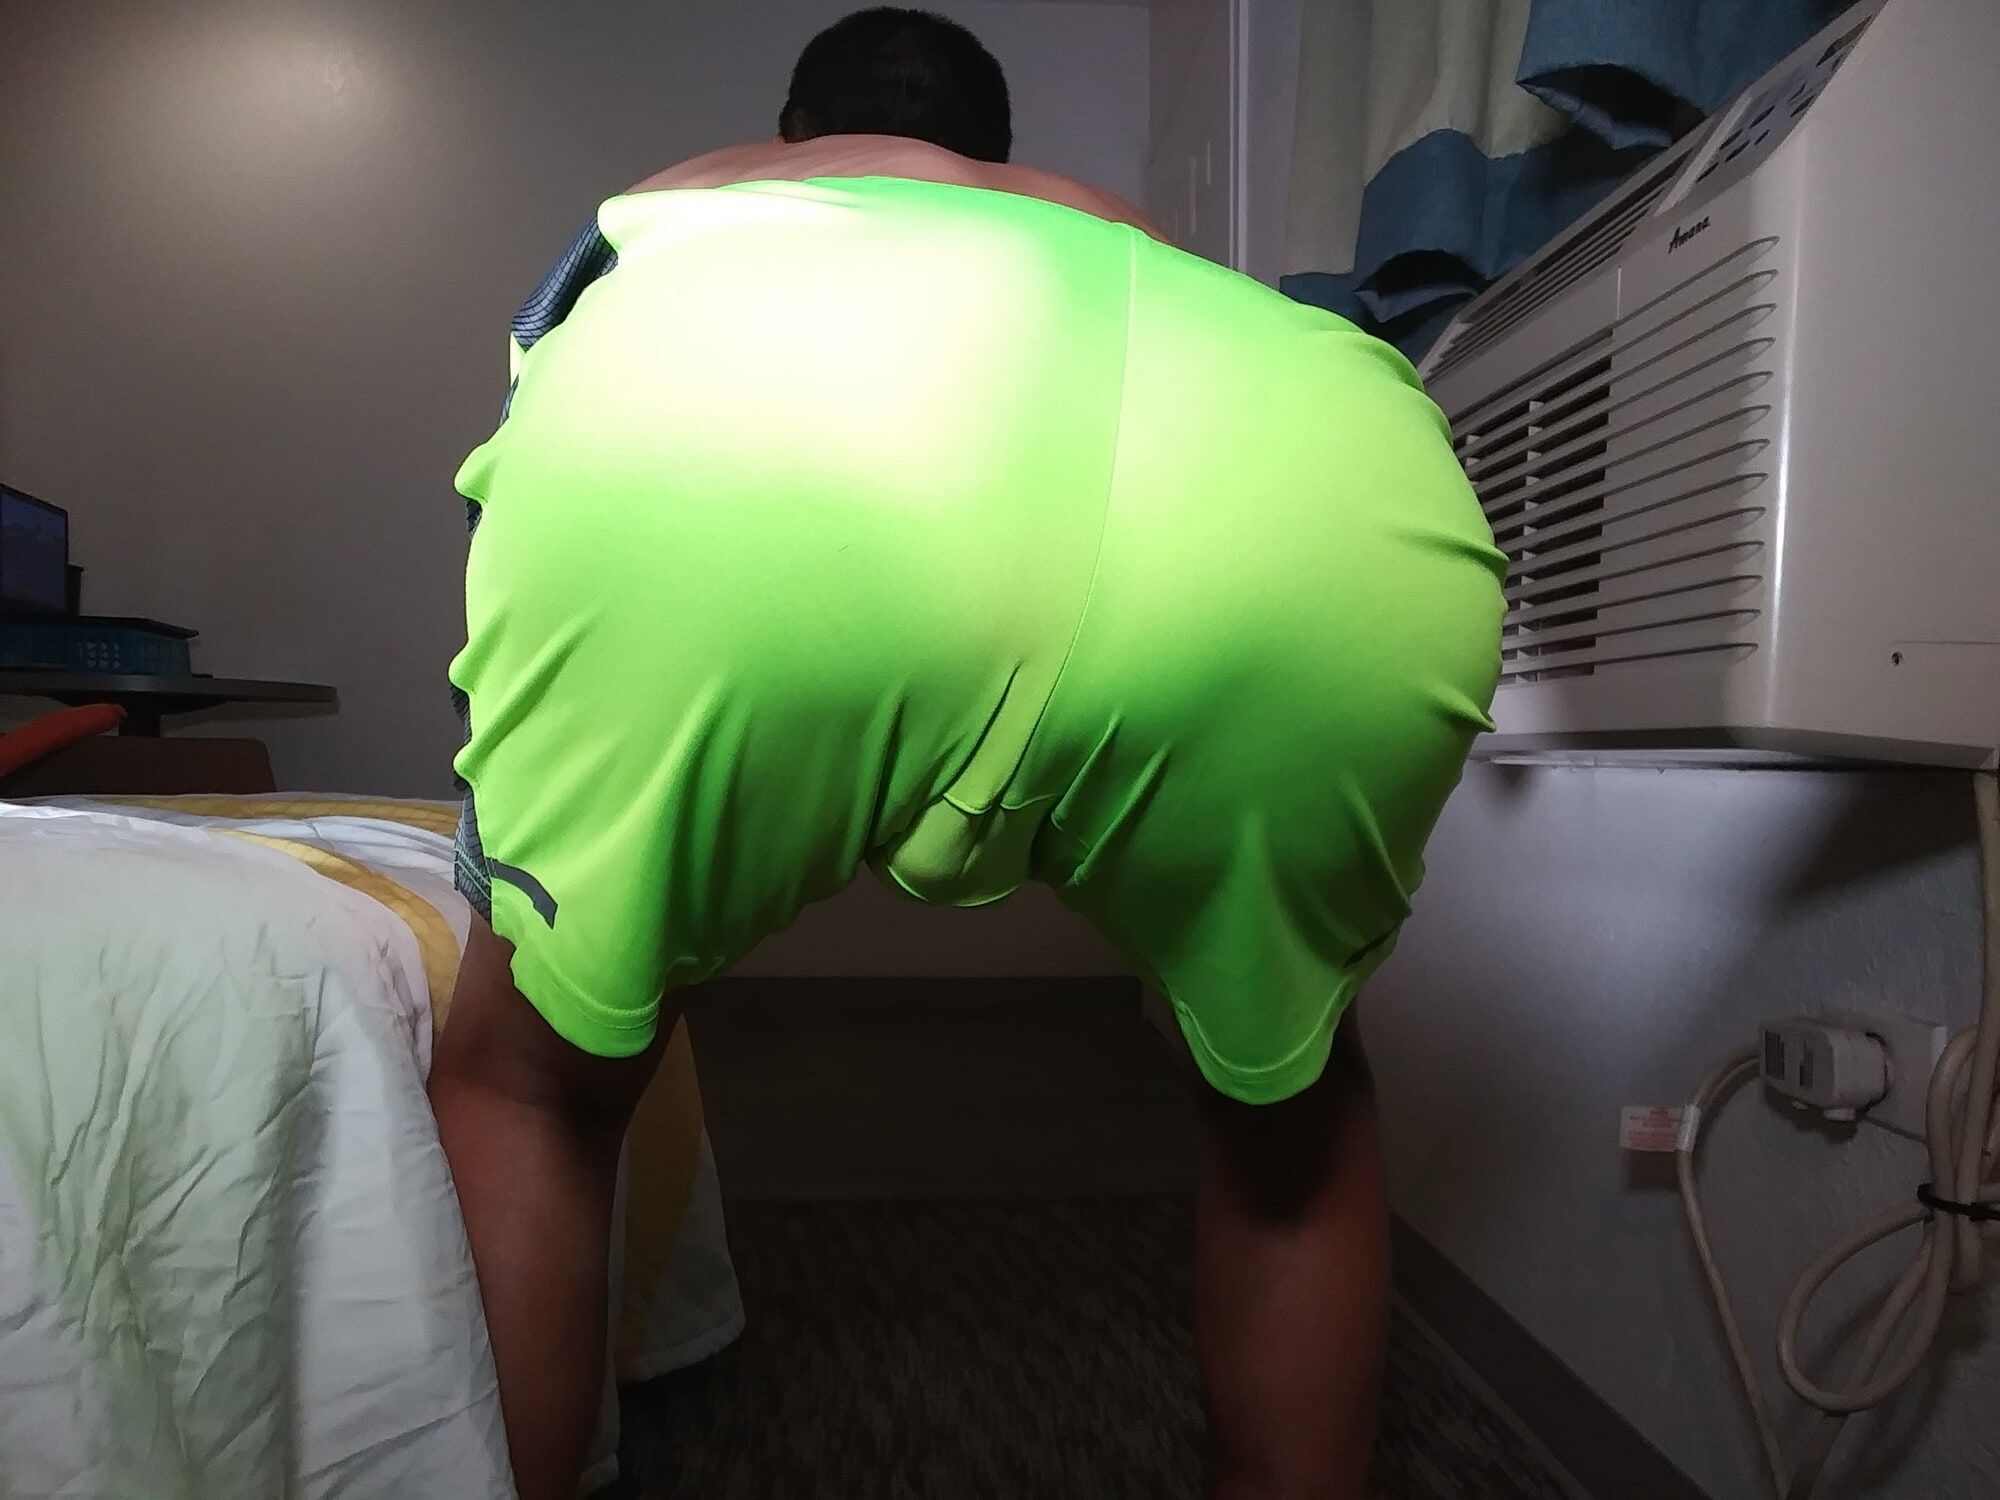 Hot asian gay showing off his tight butt wearing shorts and  #2